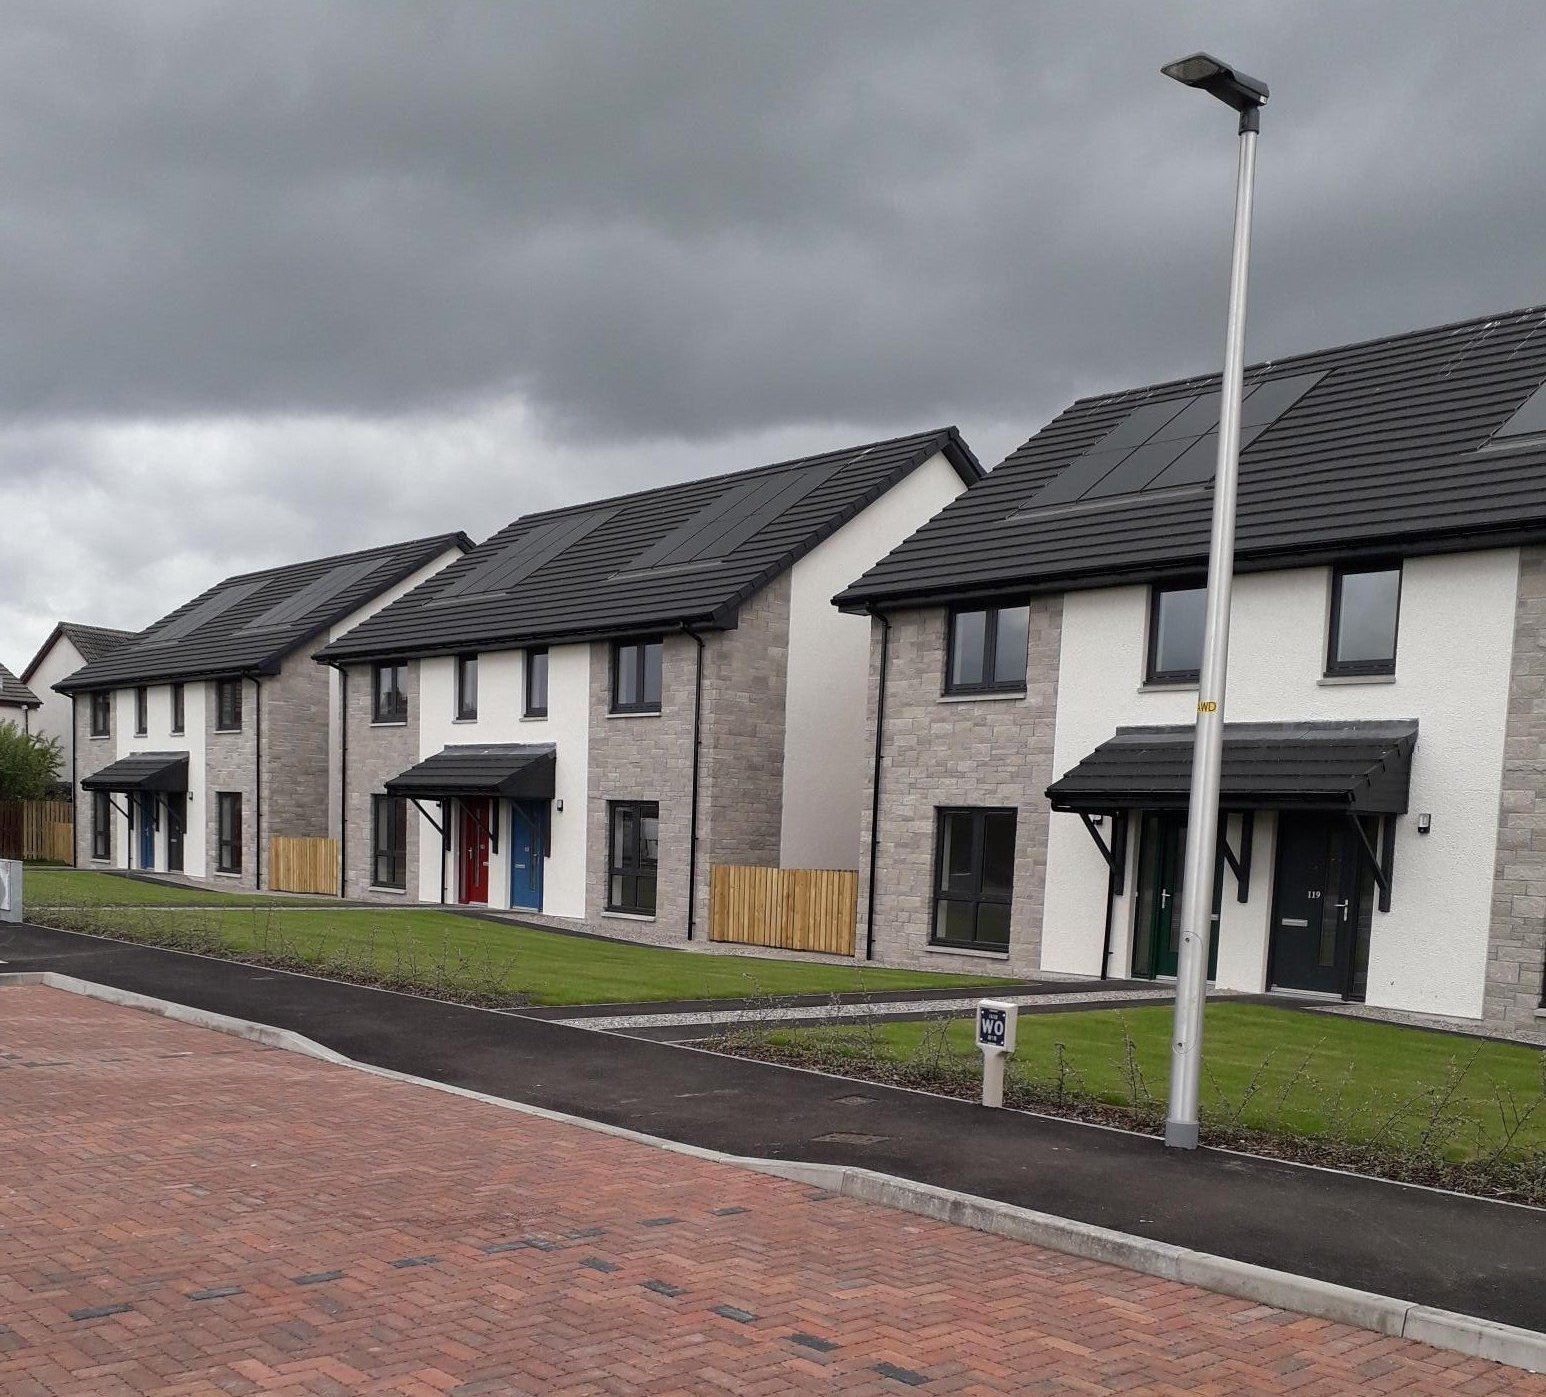 Seventeen new homes have been added to the Highland Council's stock of rental properties.